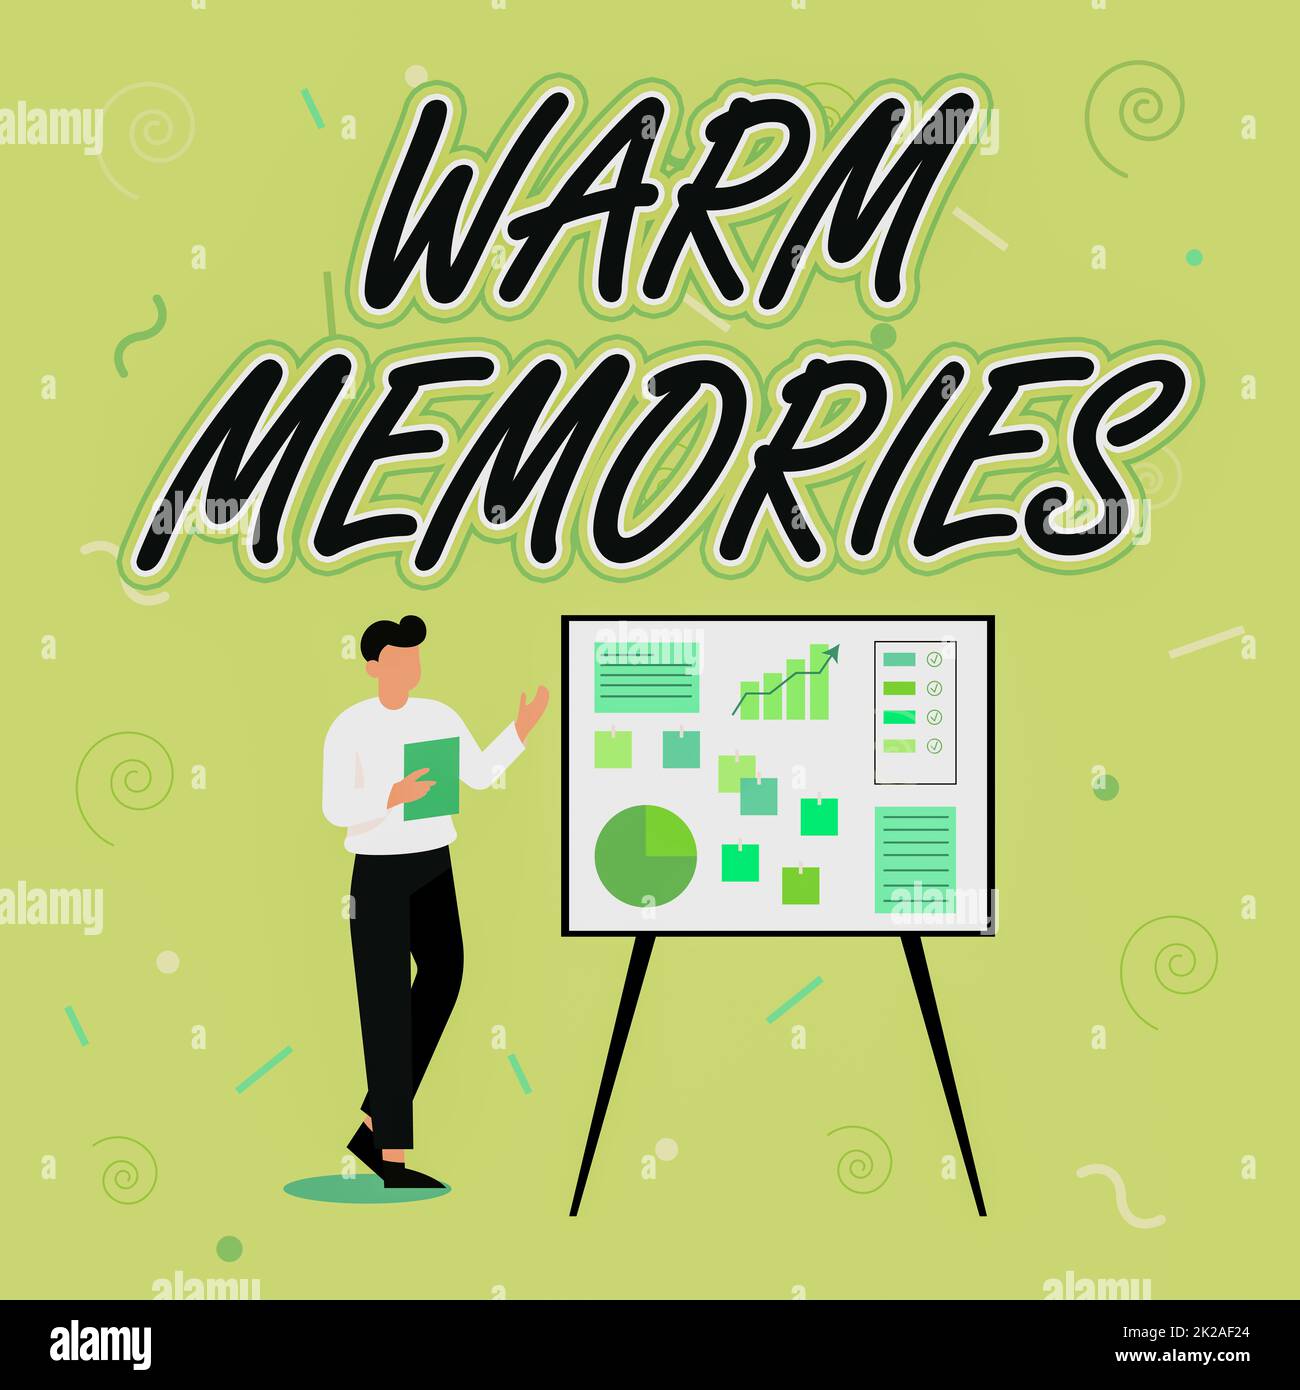 Text showing inspiration Warm Memories. Business showcase Warm Memories Businessman Drawing Standing Presenting Ideas For Their Success. Stock Photo